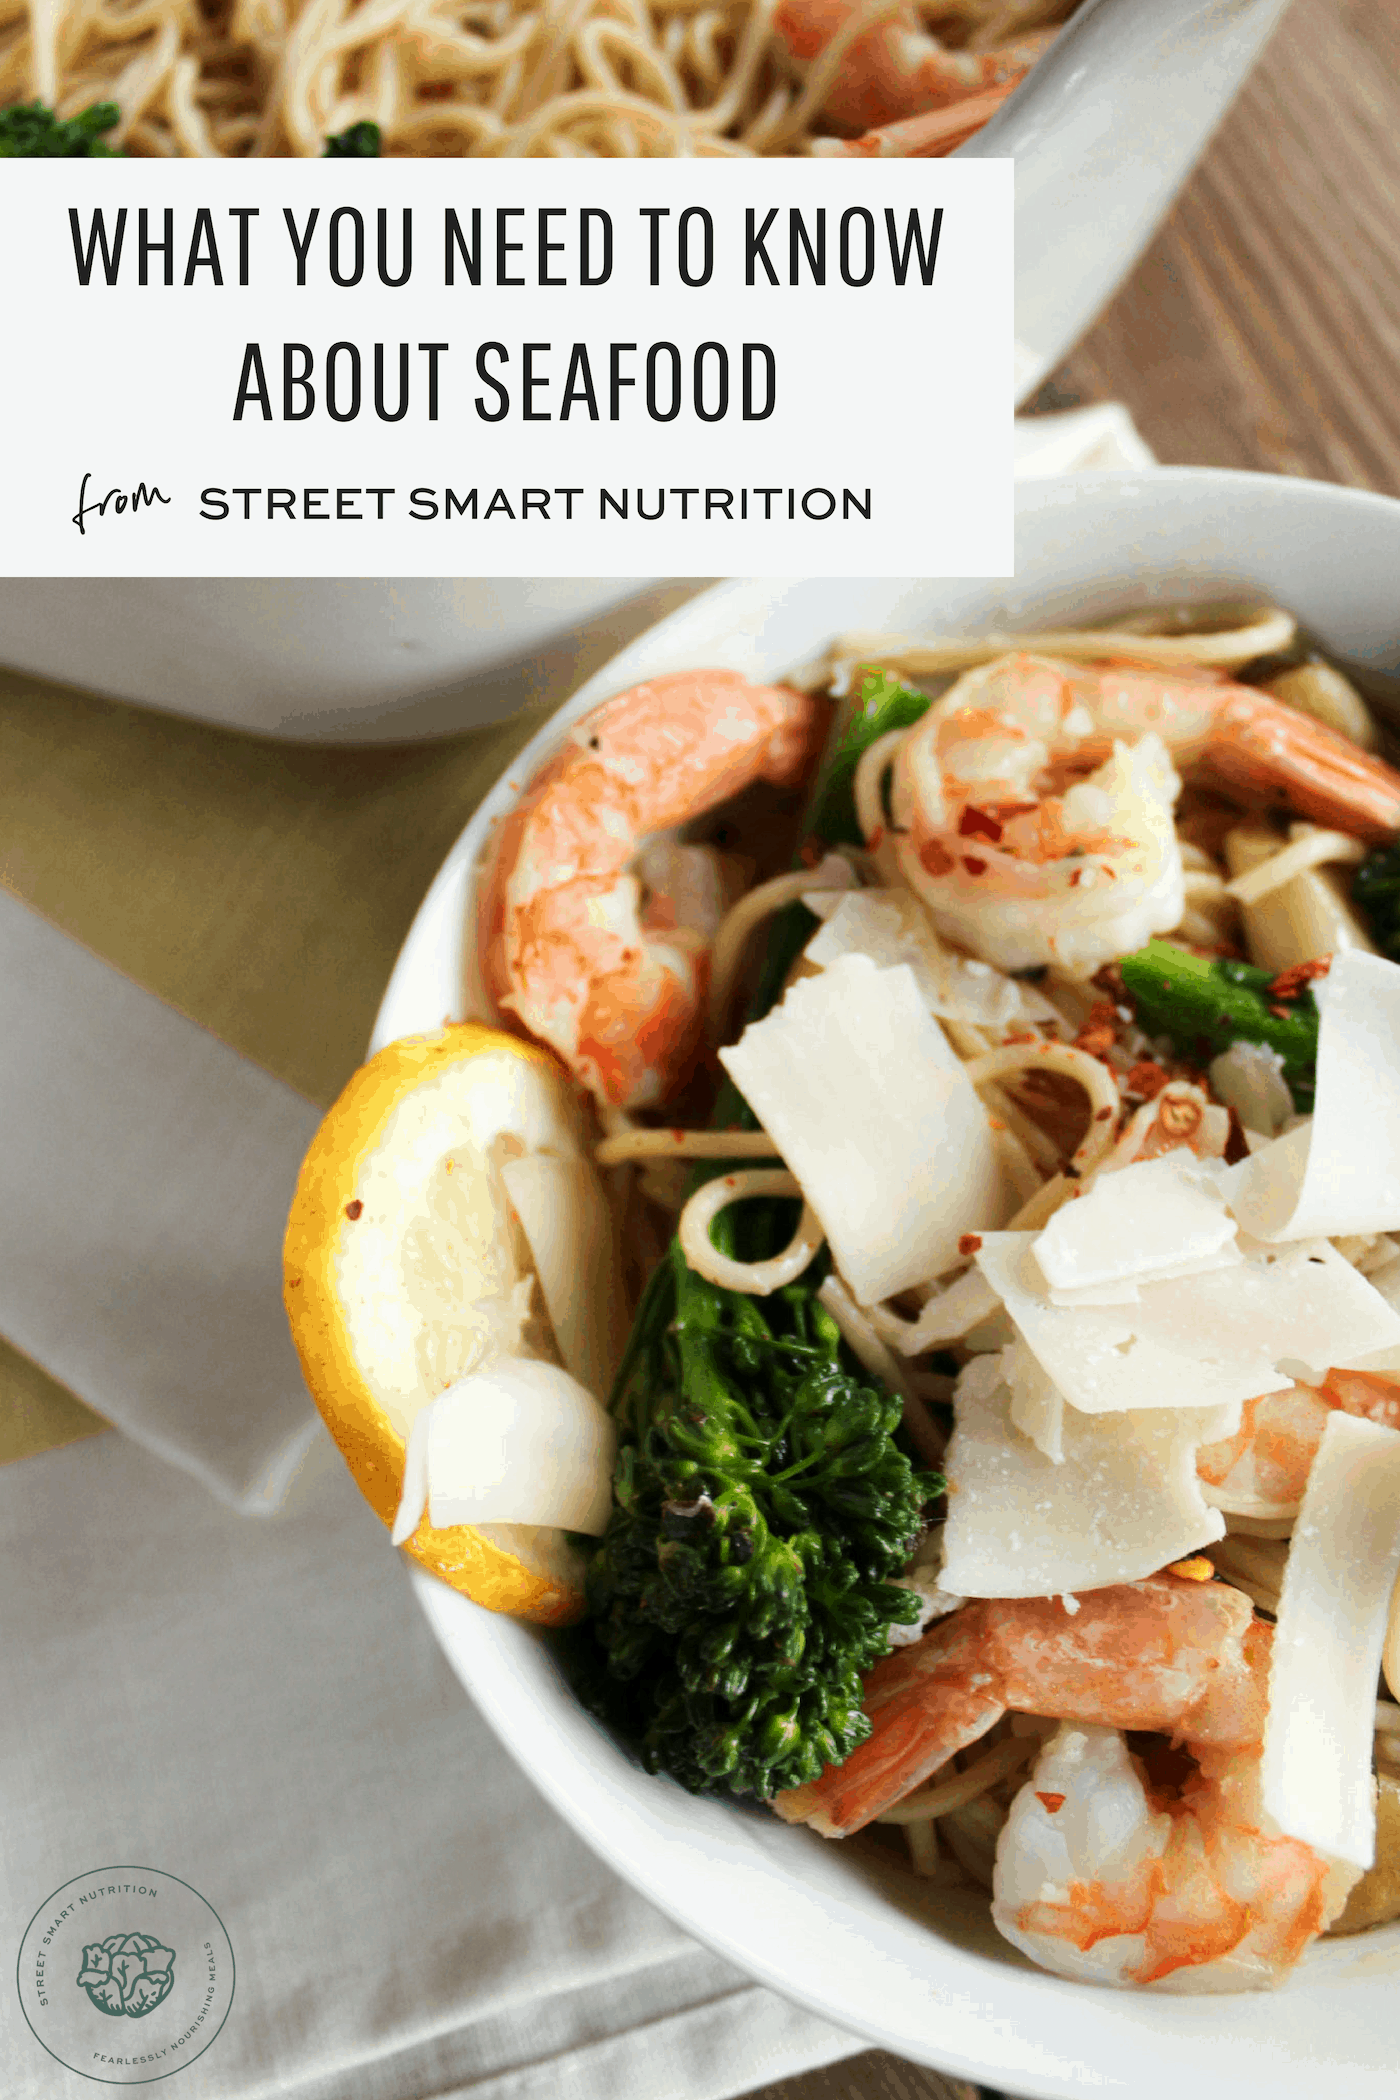 Want to eat more fish or seafood? Here's what you need to know! Get answers to some of the most common seafood questions in this post from Street Smart Nutrition